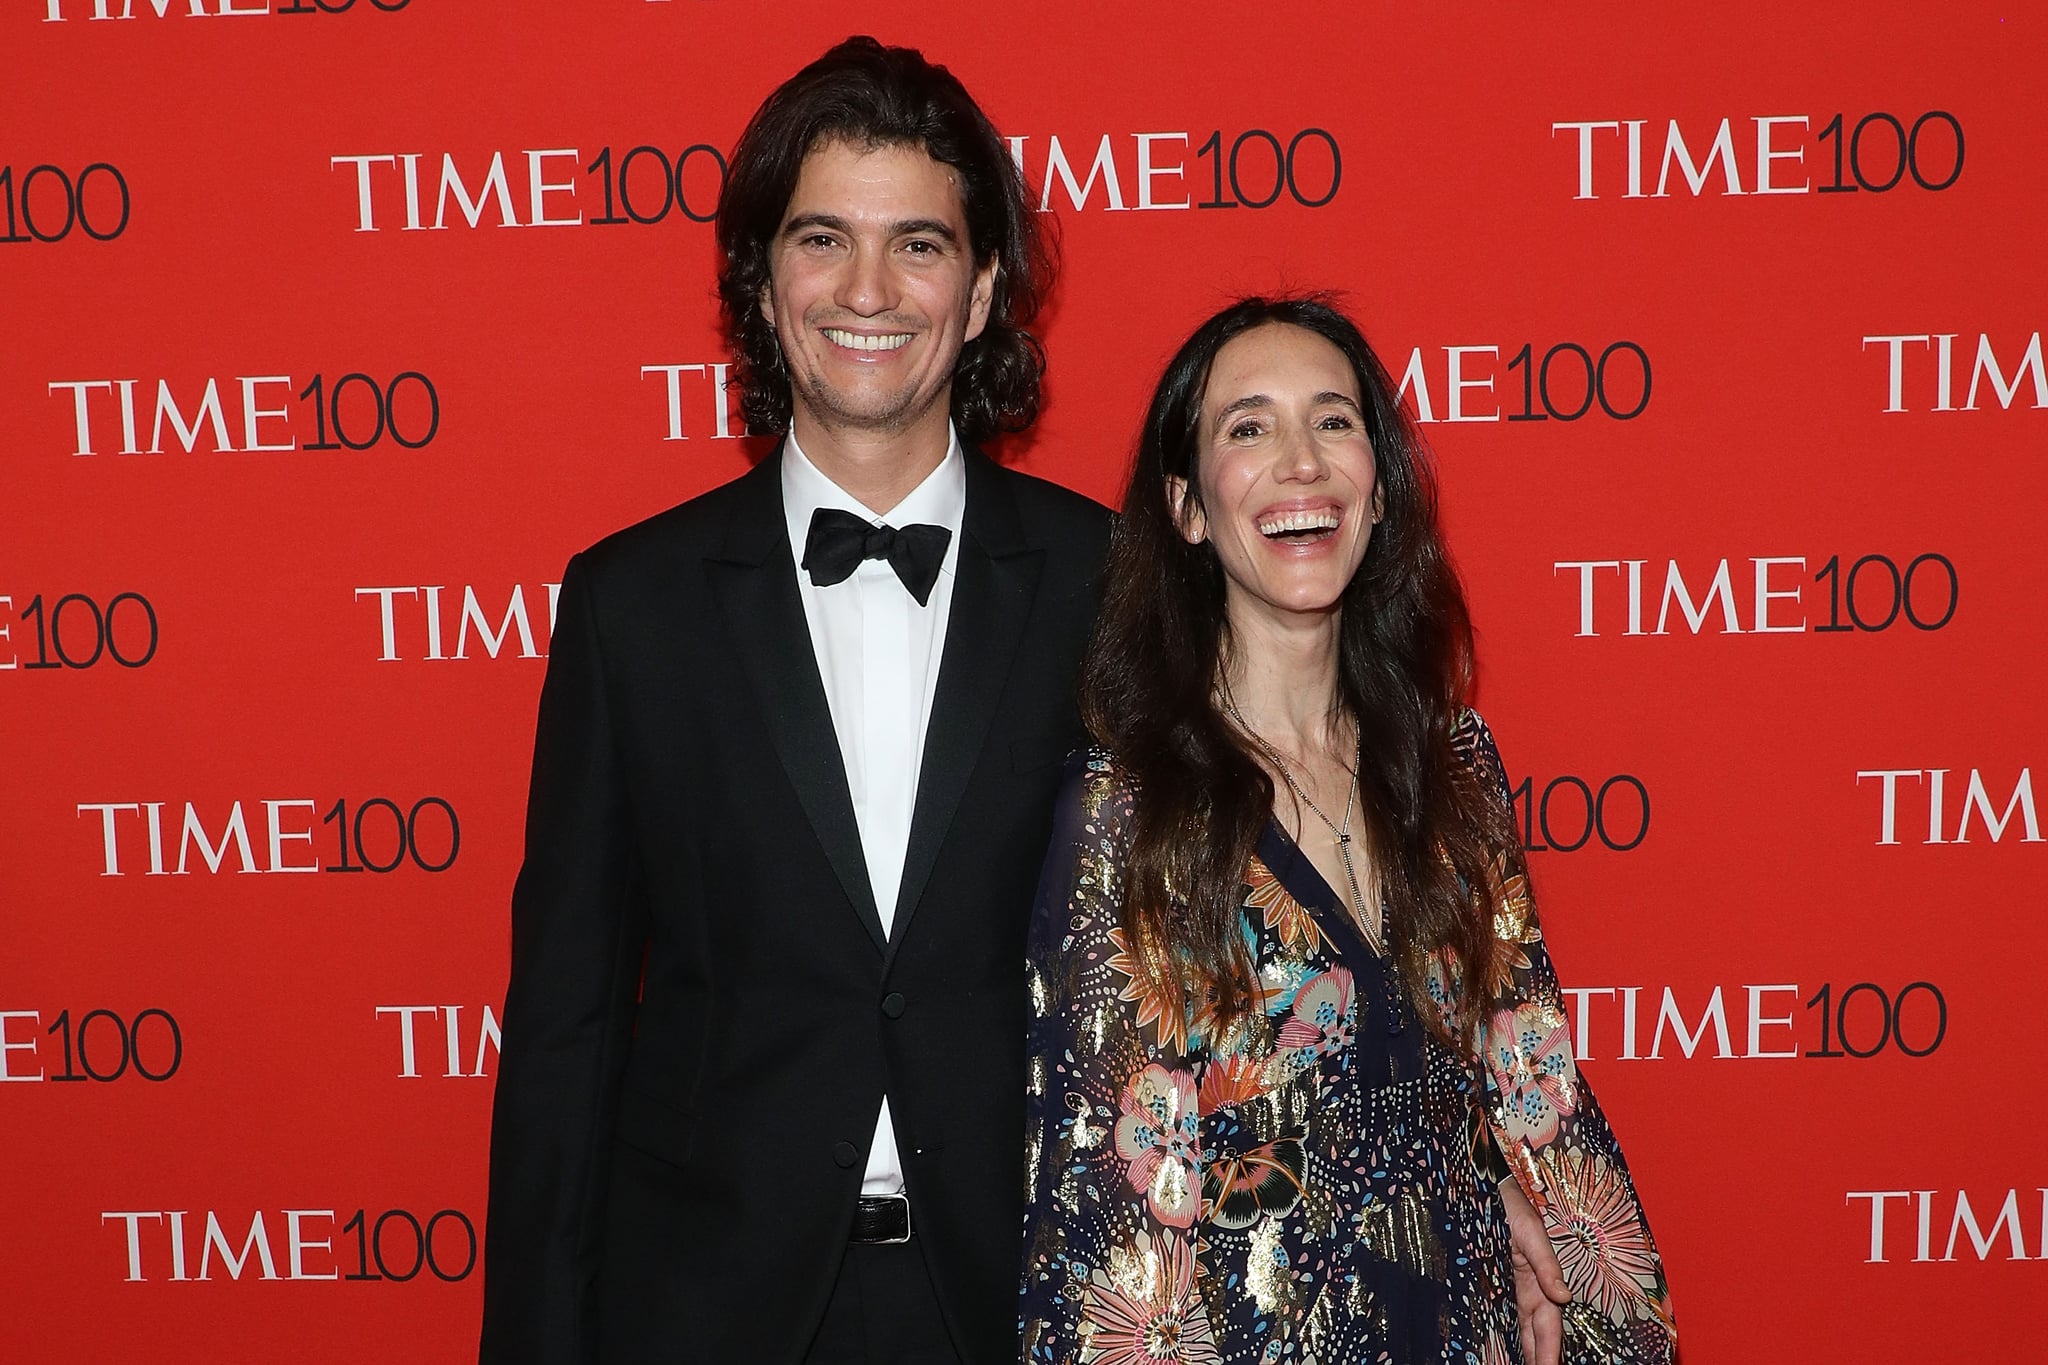 NEW YORK, NY - APRIL 24:  Adam Neumann and Rebekah Neumann attend the 2018 Time 100 Gala at Frederick P. Rose Hall, Jazz at Lincoln Centre on April 24, 2018 in New York City.  (Photo by Taylor Hill/FilmMagic)